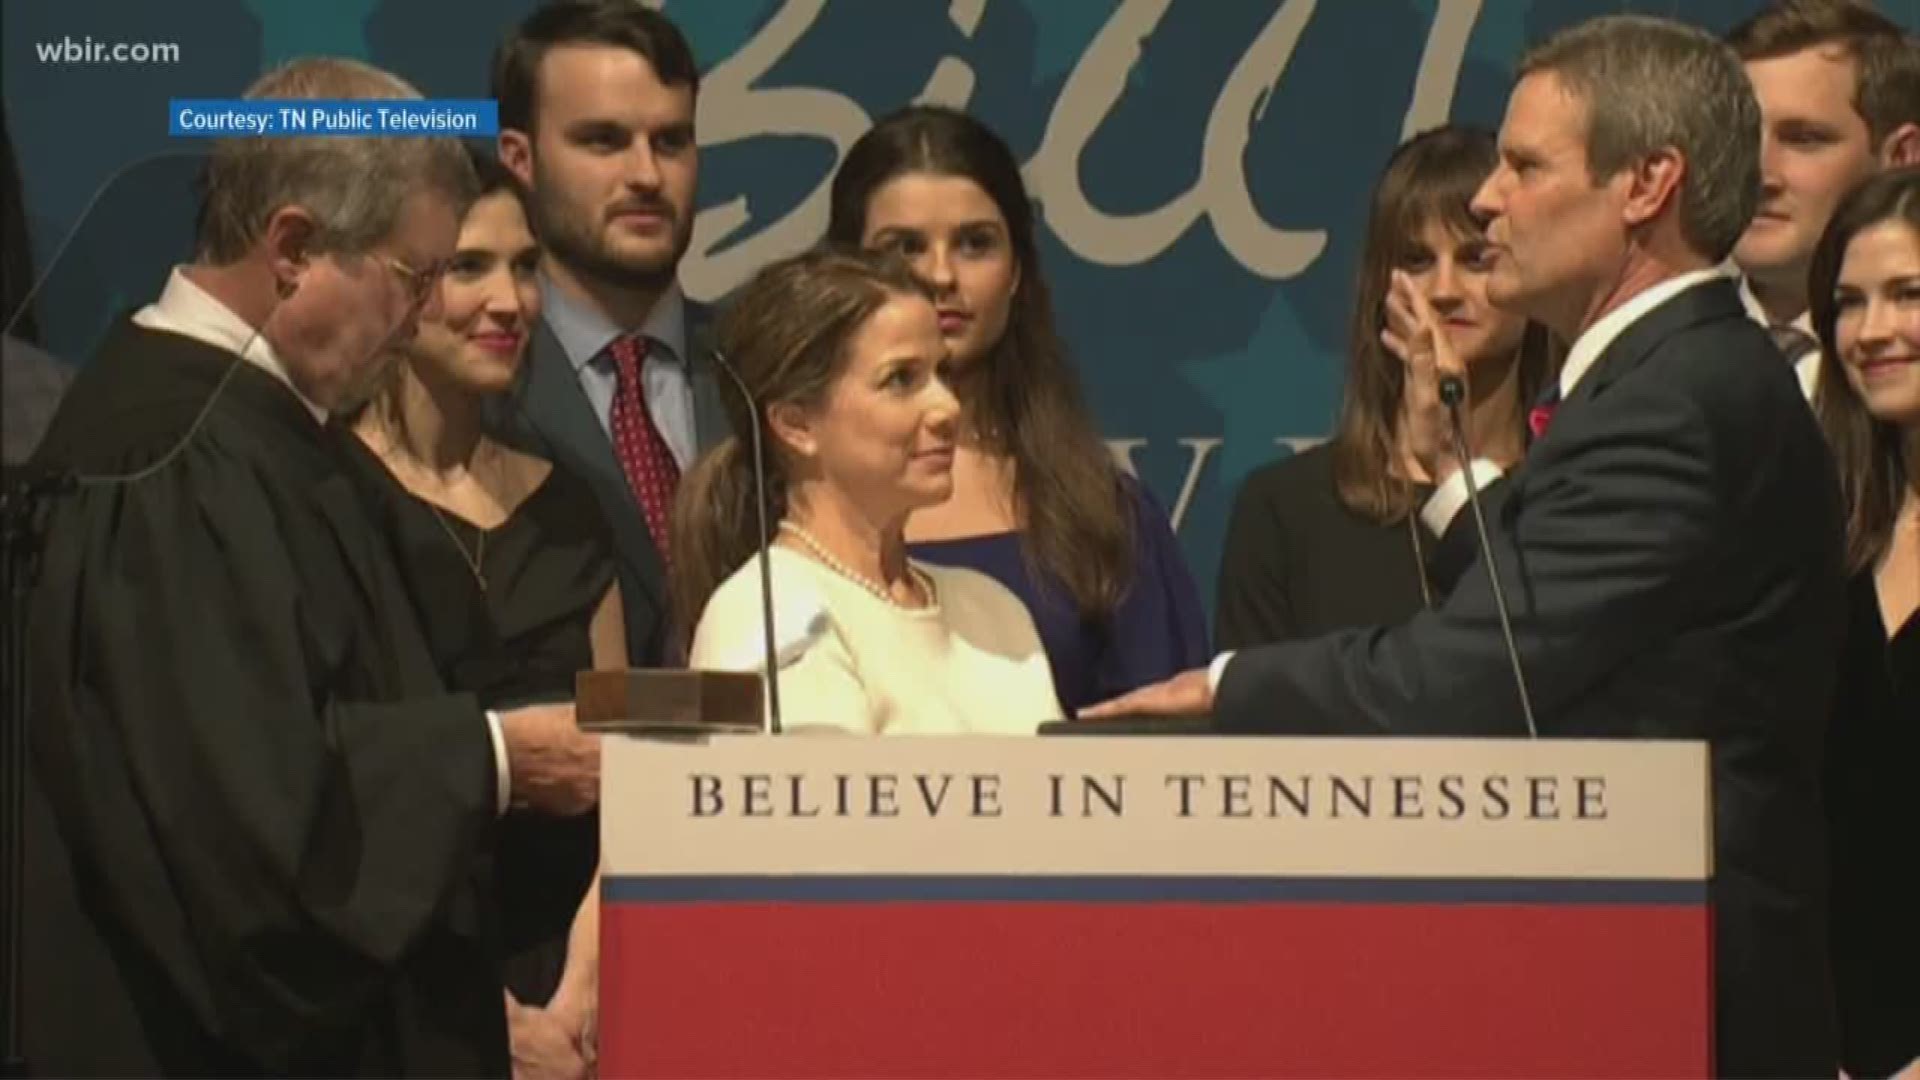 Bill Lee has been sworn in as the 50th governor of Tennessee.